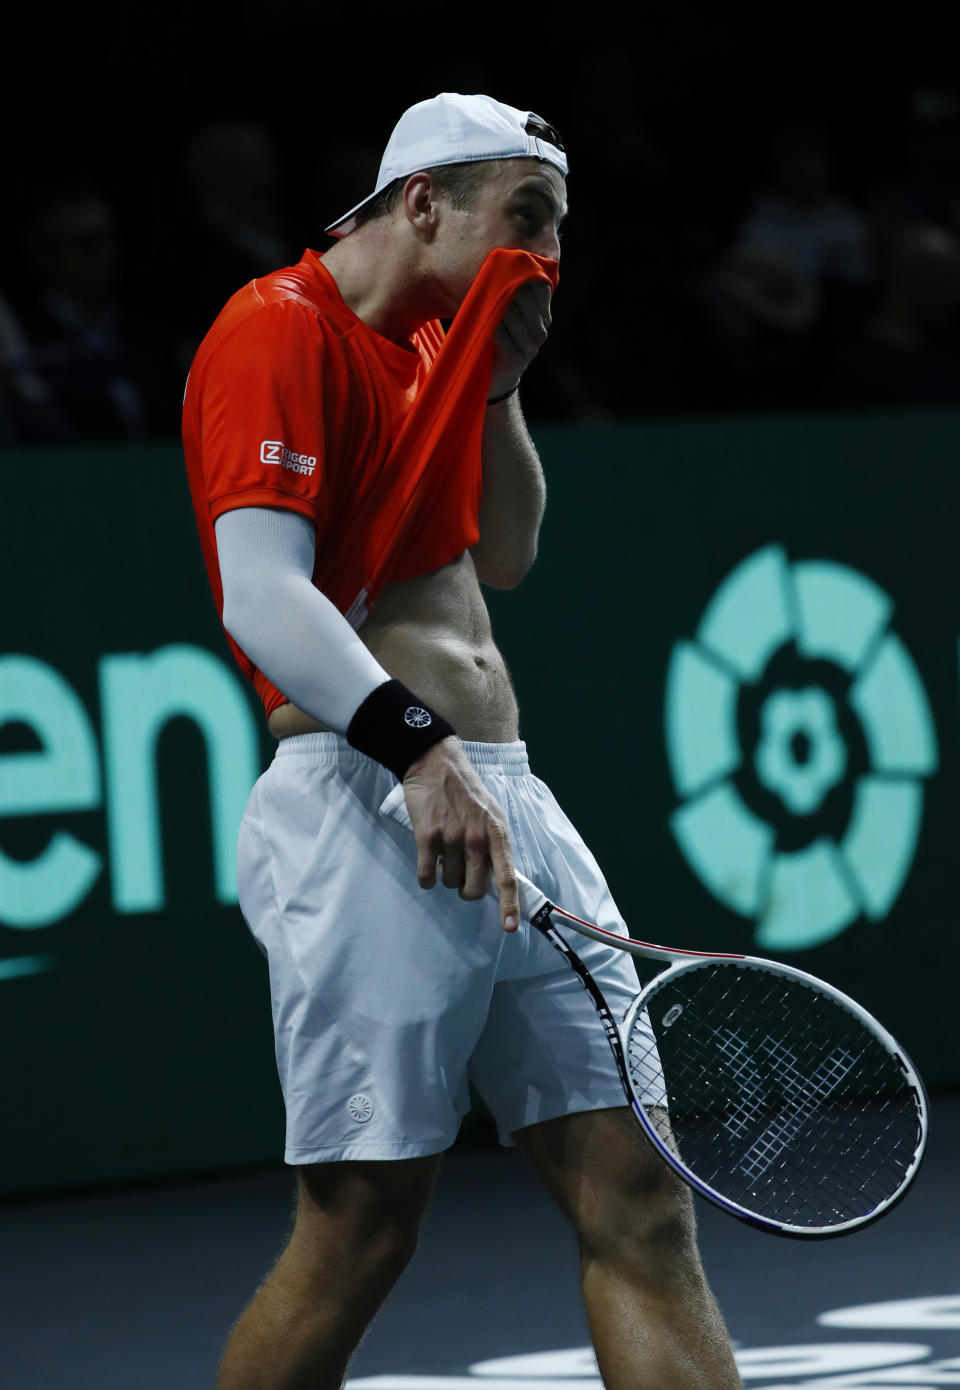 Netherland's Tallon Griekspoor reacts while playing against Australia's Jordan Thompson during a Davis Cup quarter-final tennis match between Australia and The Netherlands in Malaga, Spain, Tuesday, Nov. 22, 2022. (AP Photo/Joan Monfort)